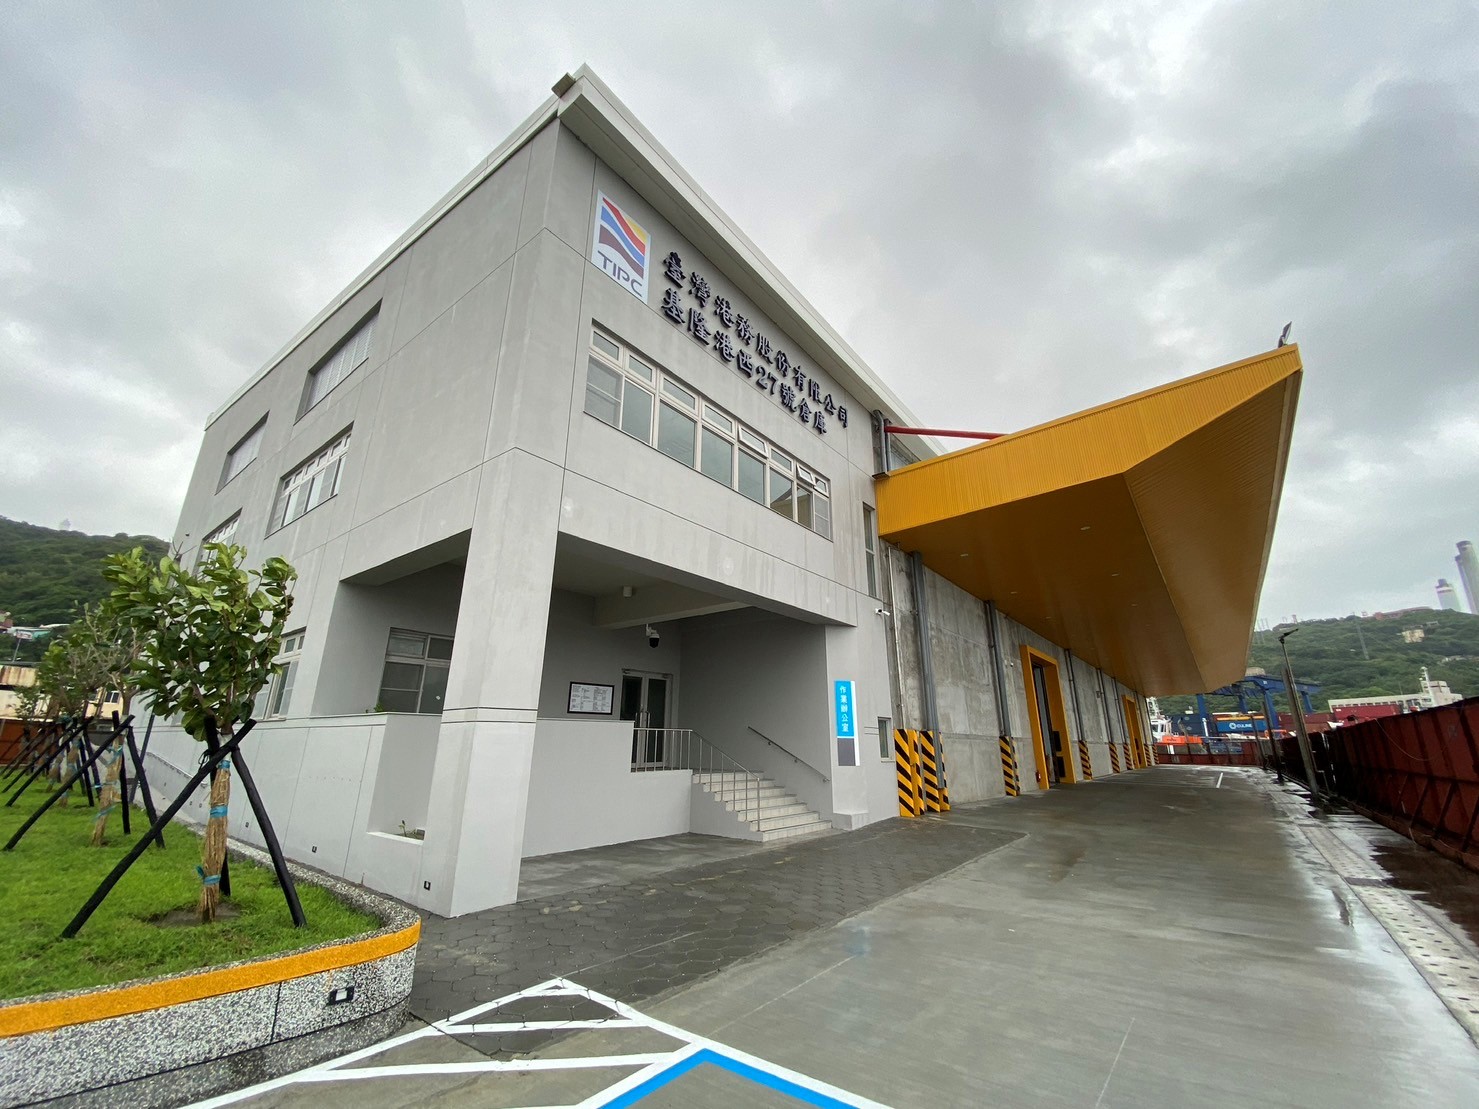 Image 1: Exterior of the newly completed Port of Keelung West Warehouse 27